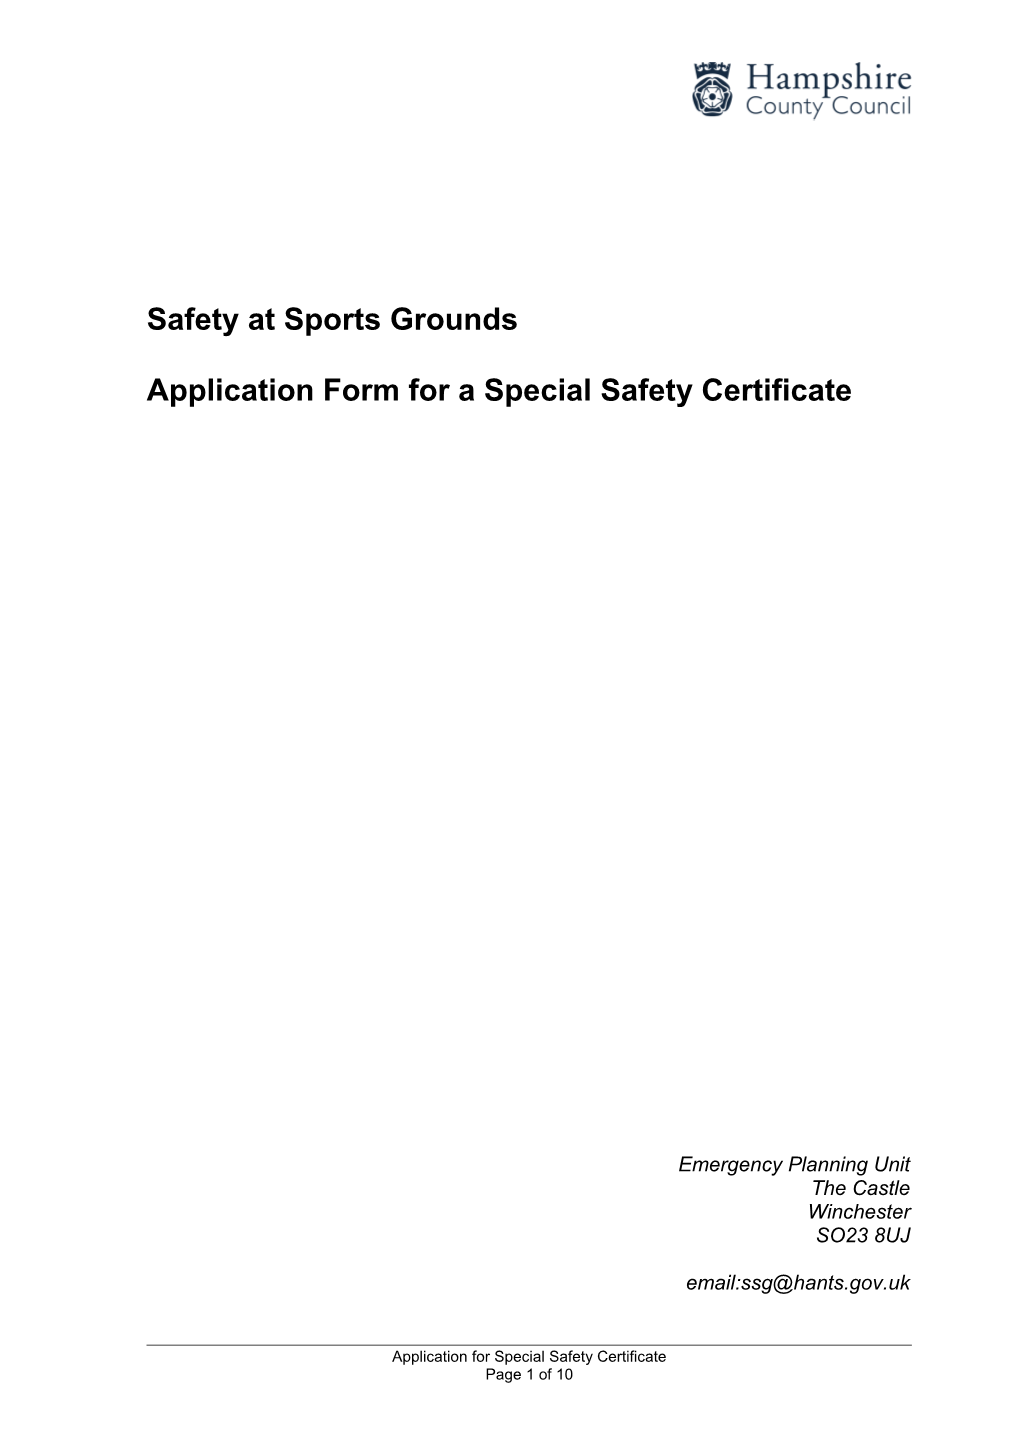 Application for a General Or Special Safety Certificate for a Designated Sports Ground